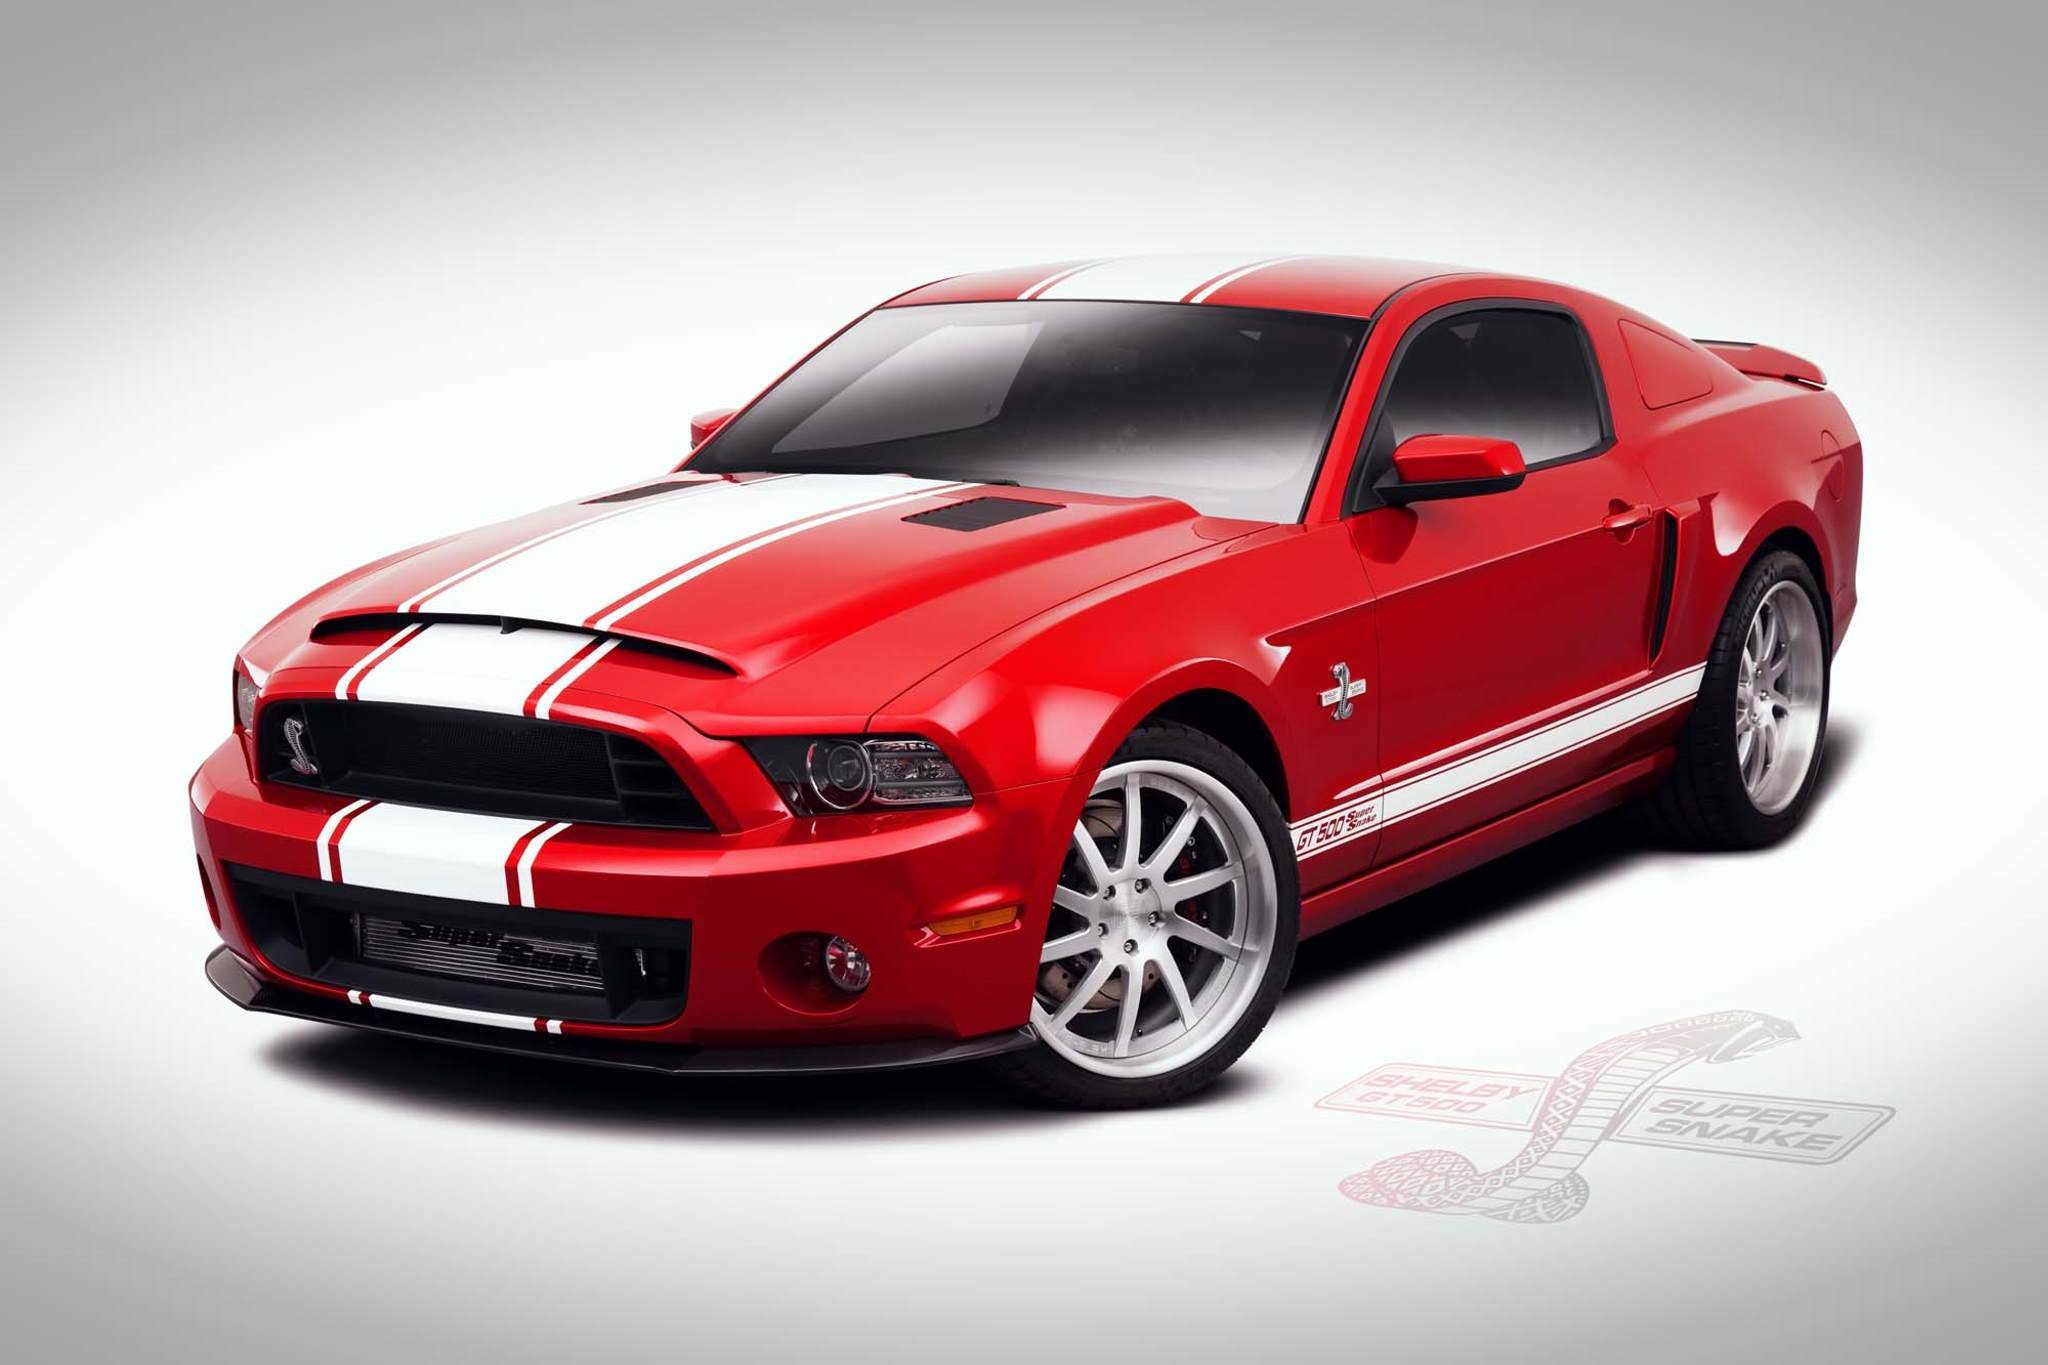 2013, Ford, Mustang, Shelby, Gt500, Super, Snake, Supercar, Usa,  01 Wallpaper